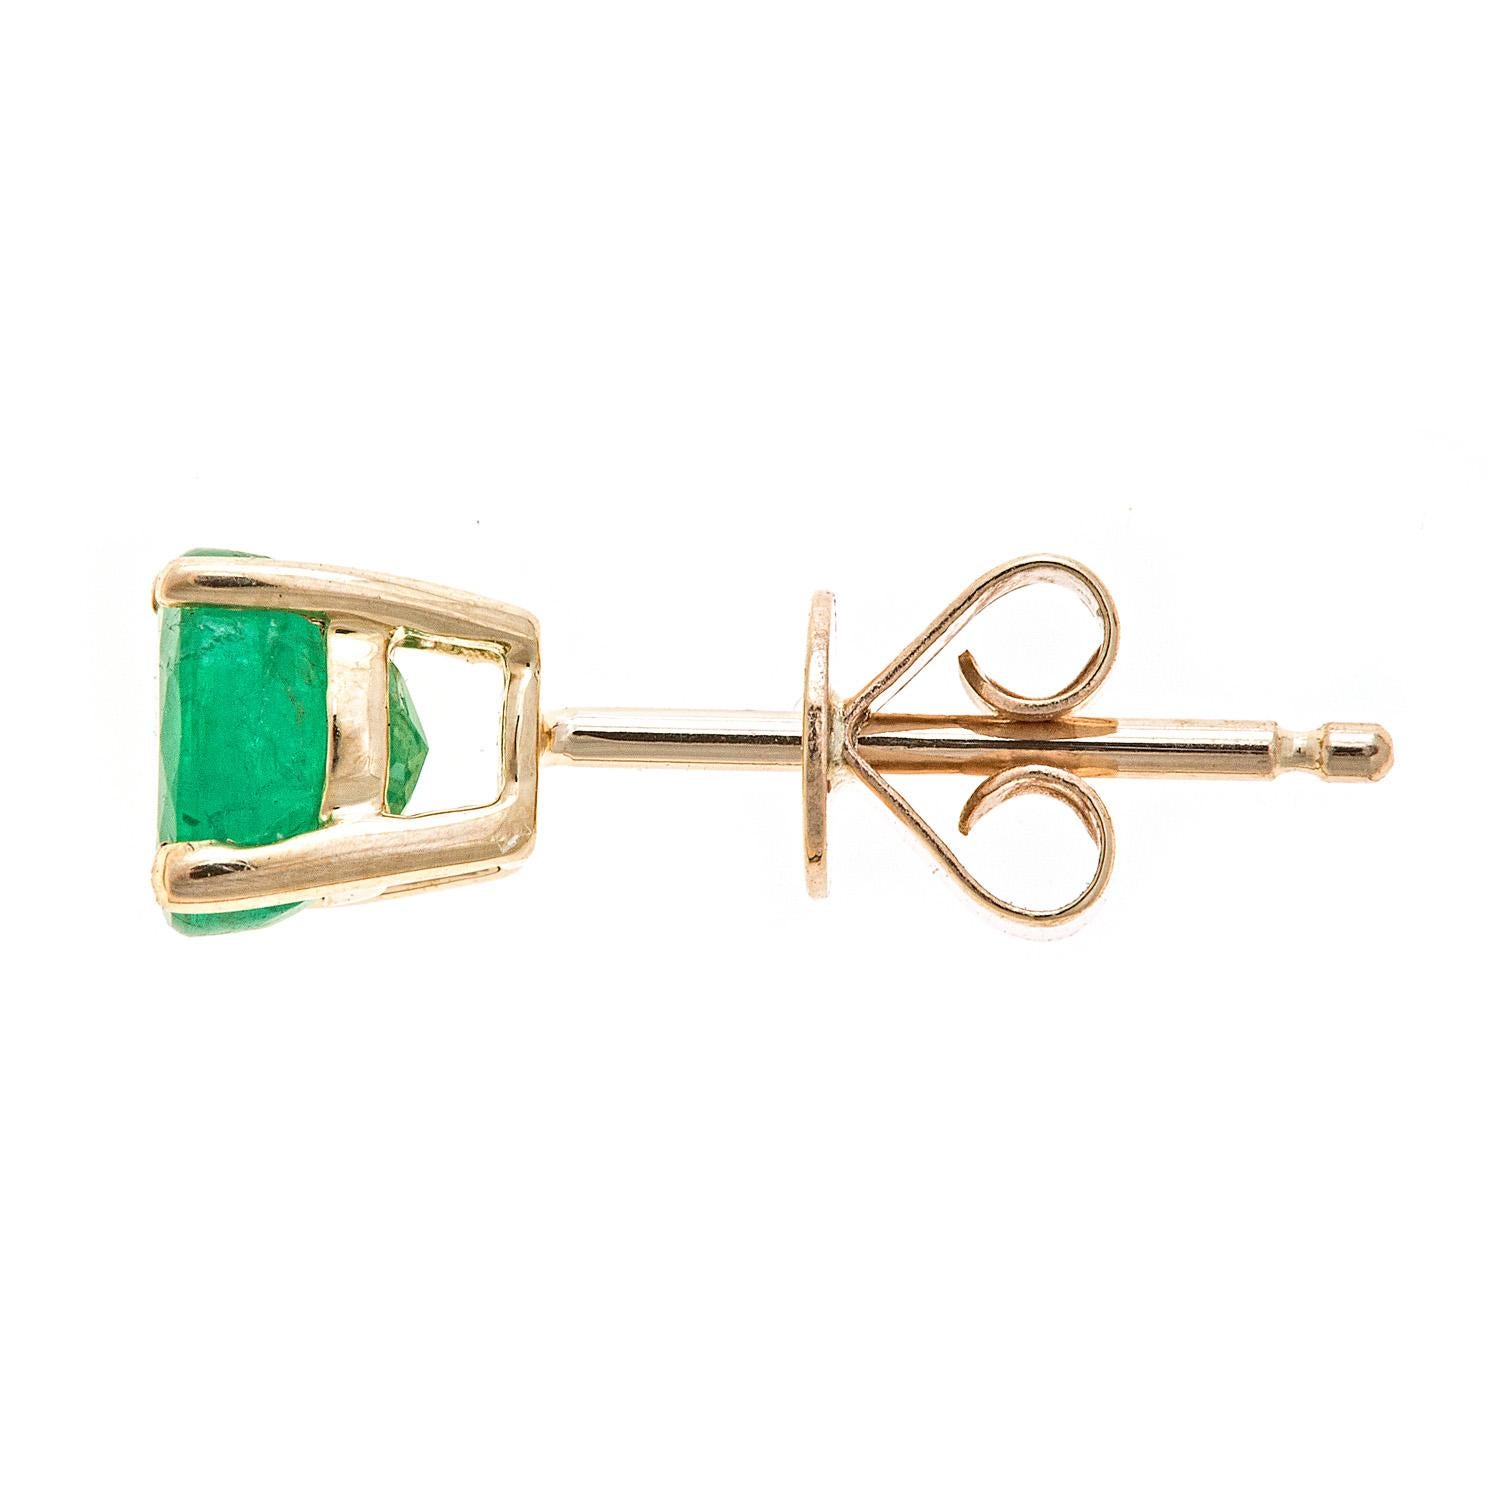 Decorate yourself in elegance with this Earring is crafted from 10-karat Yellow Gold by Gin & Grace Earring. This Earring is made up of 5.0 mm Round-cut (2 pcs) 1.01 carat Emerald. This Earring is weight 0.69 grams. This delicate Earring is polished